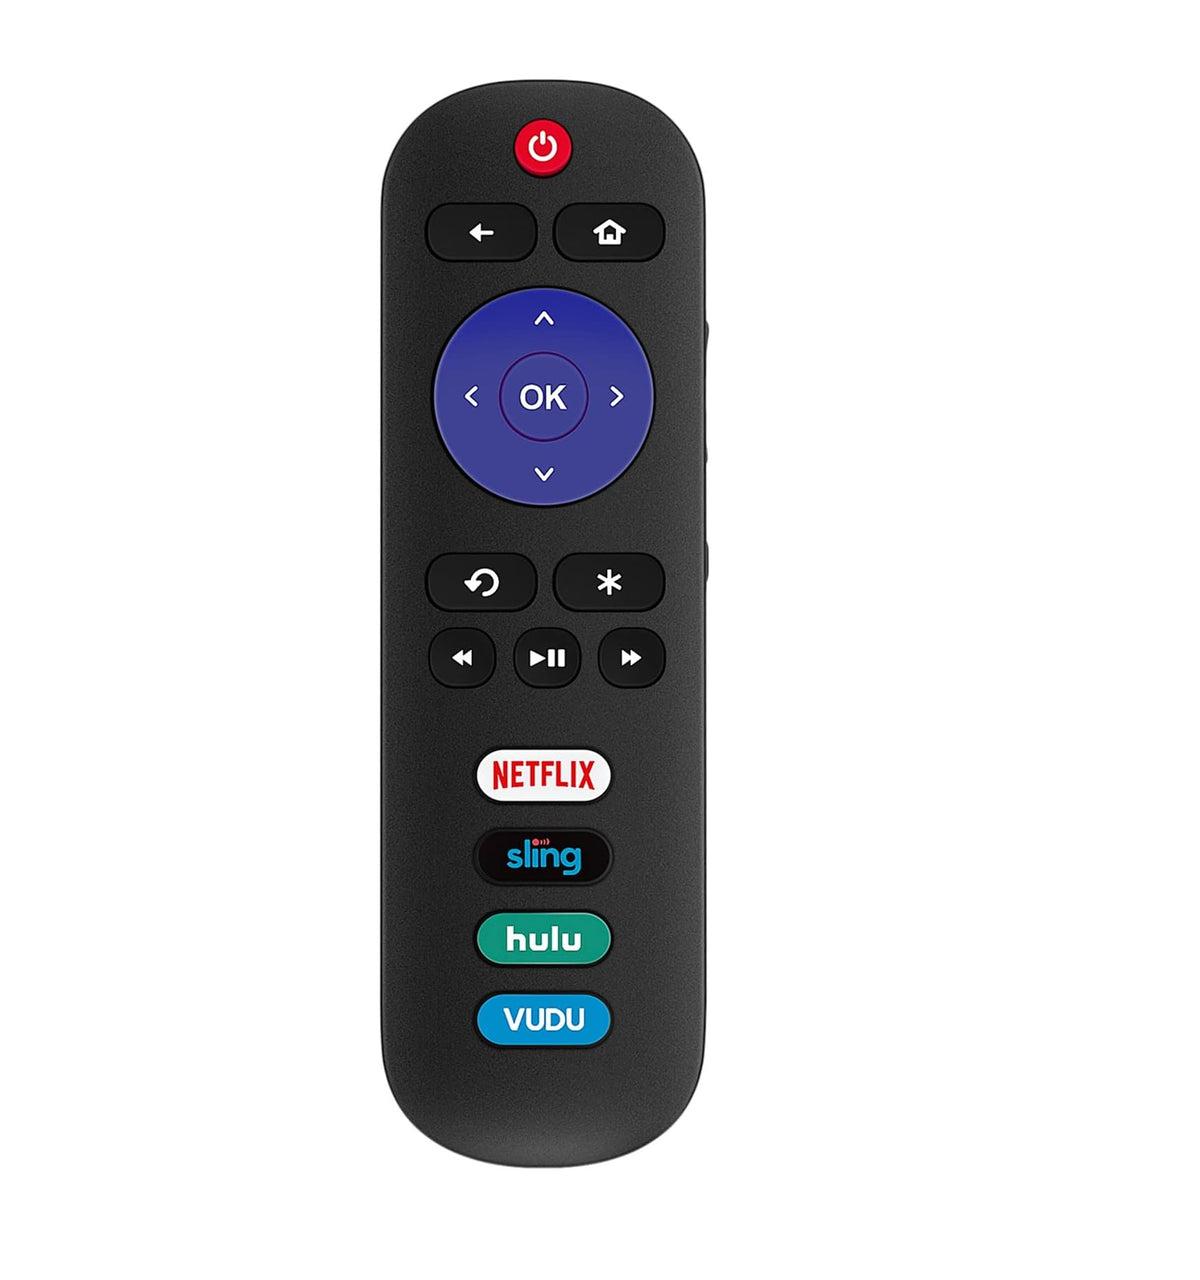 RC280 Replace Remote Applicable for TCL Roku TV 32S4610R 50FS3750 32FS3700 32FS4610R 32S800 32S850 32S3850 48FS3700 55FS3700 65S405 43S405 49S405 40S3800 50S431 55S431 43S435 50S435 43S525